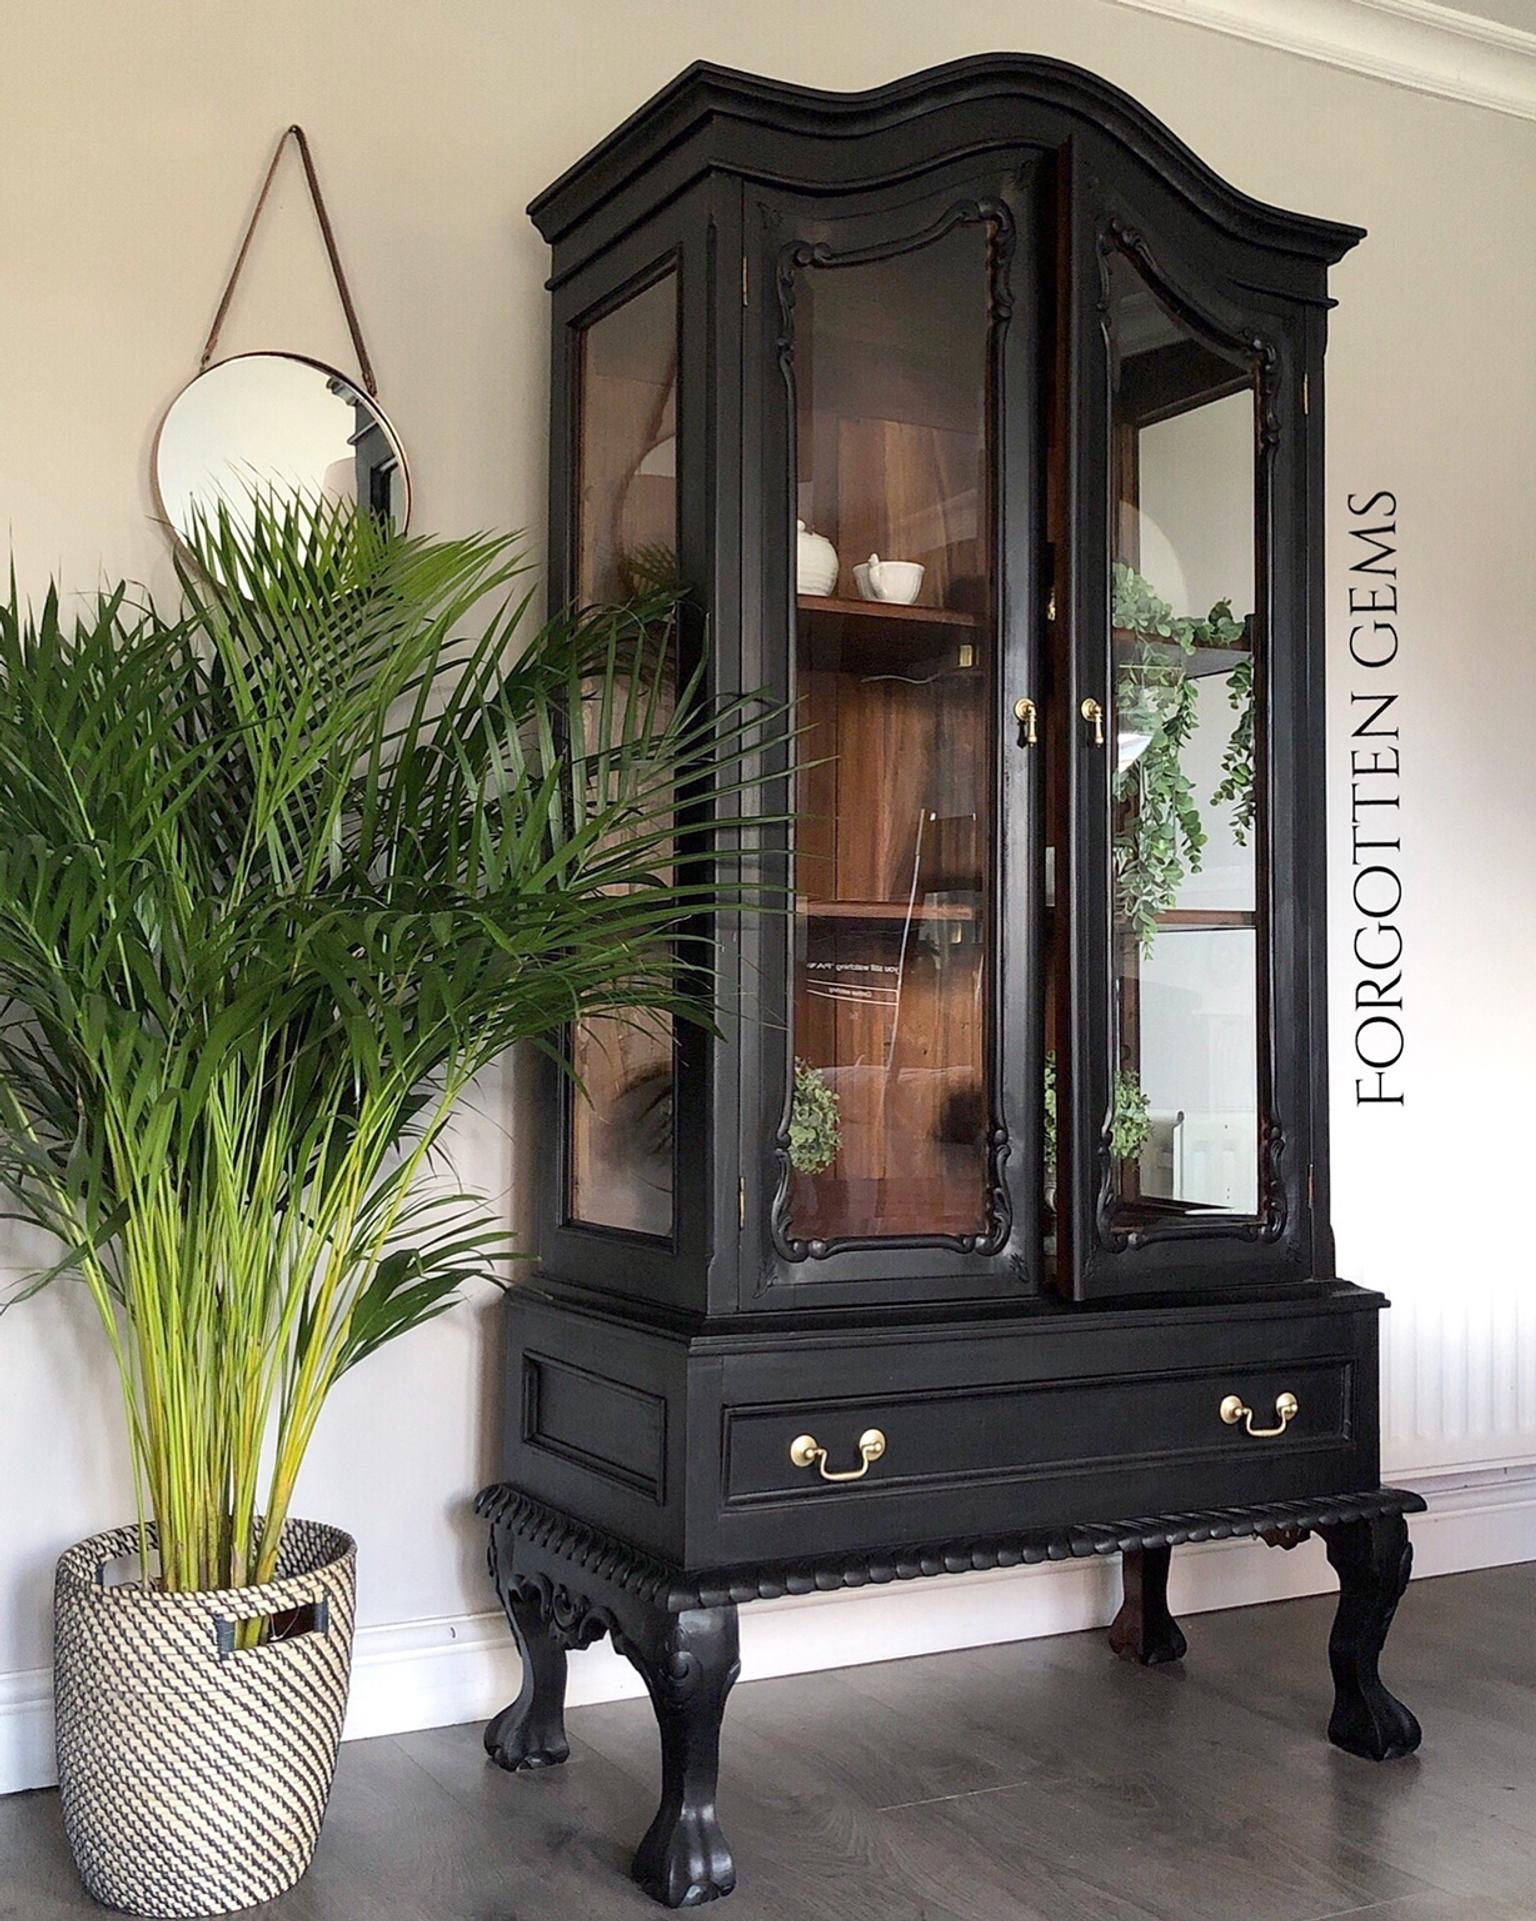 French Style Glass Display China Cabinet In Oakengates Fur 695 00